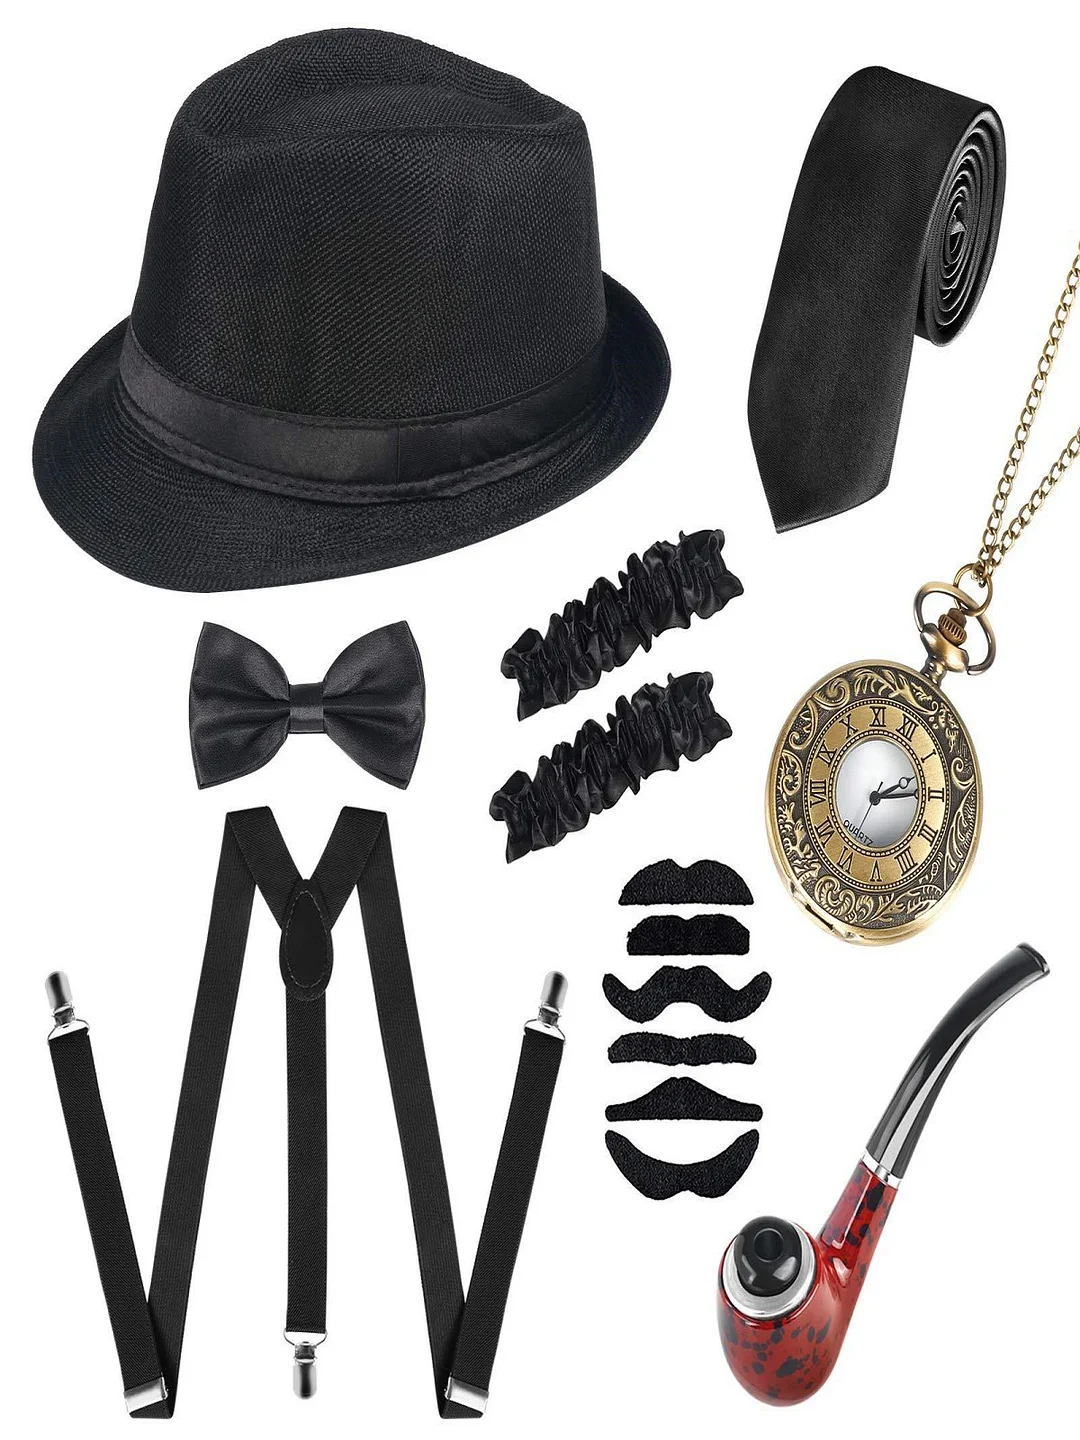 Novameme Men's Prom Eight Piece Sets Halloween 1920s Gatsby Party Costume Accessories